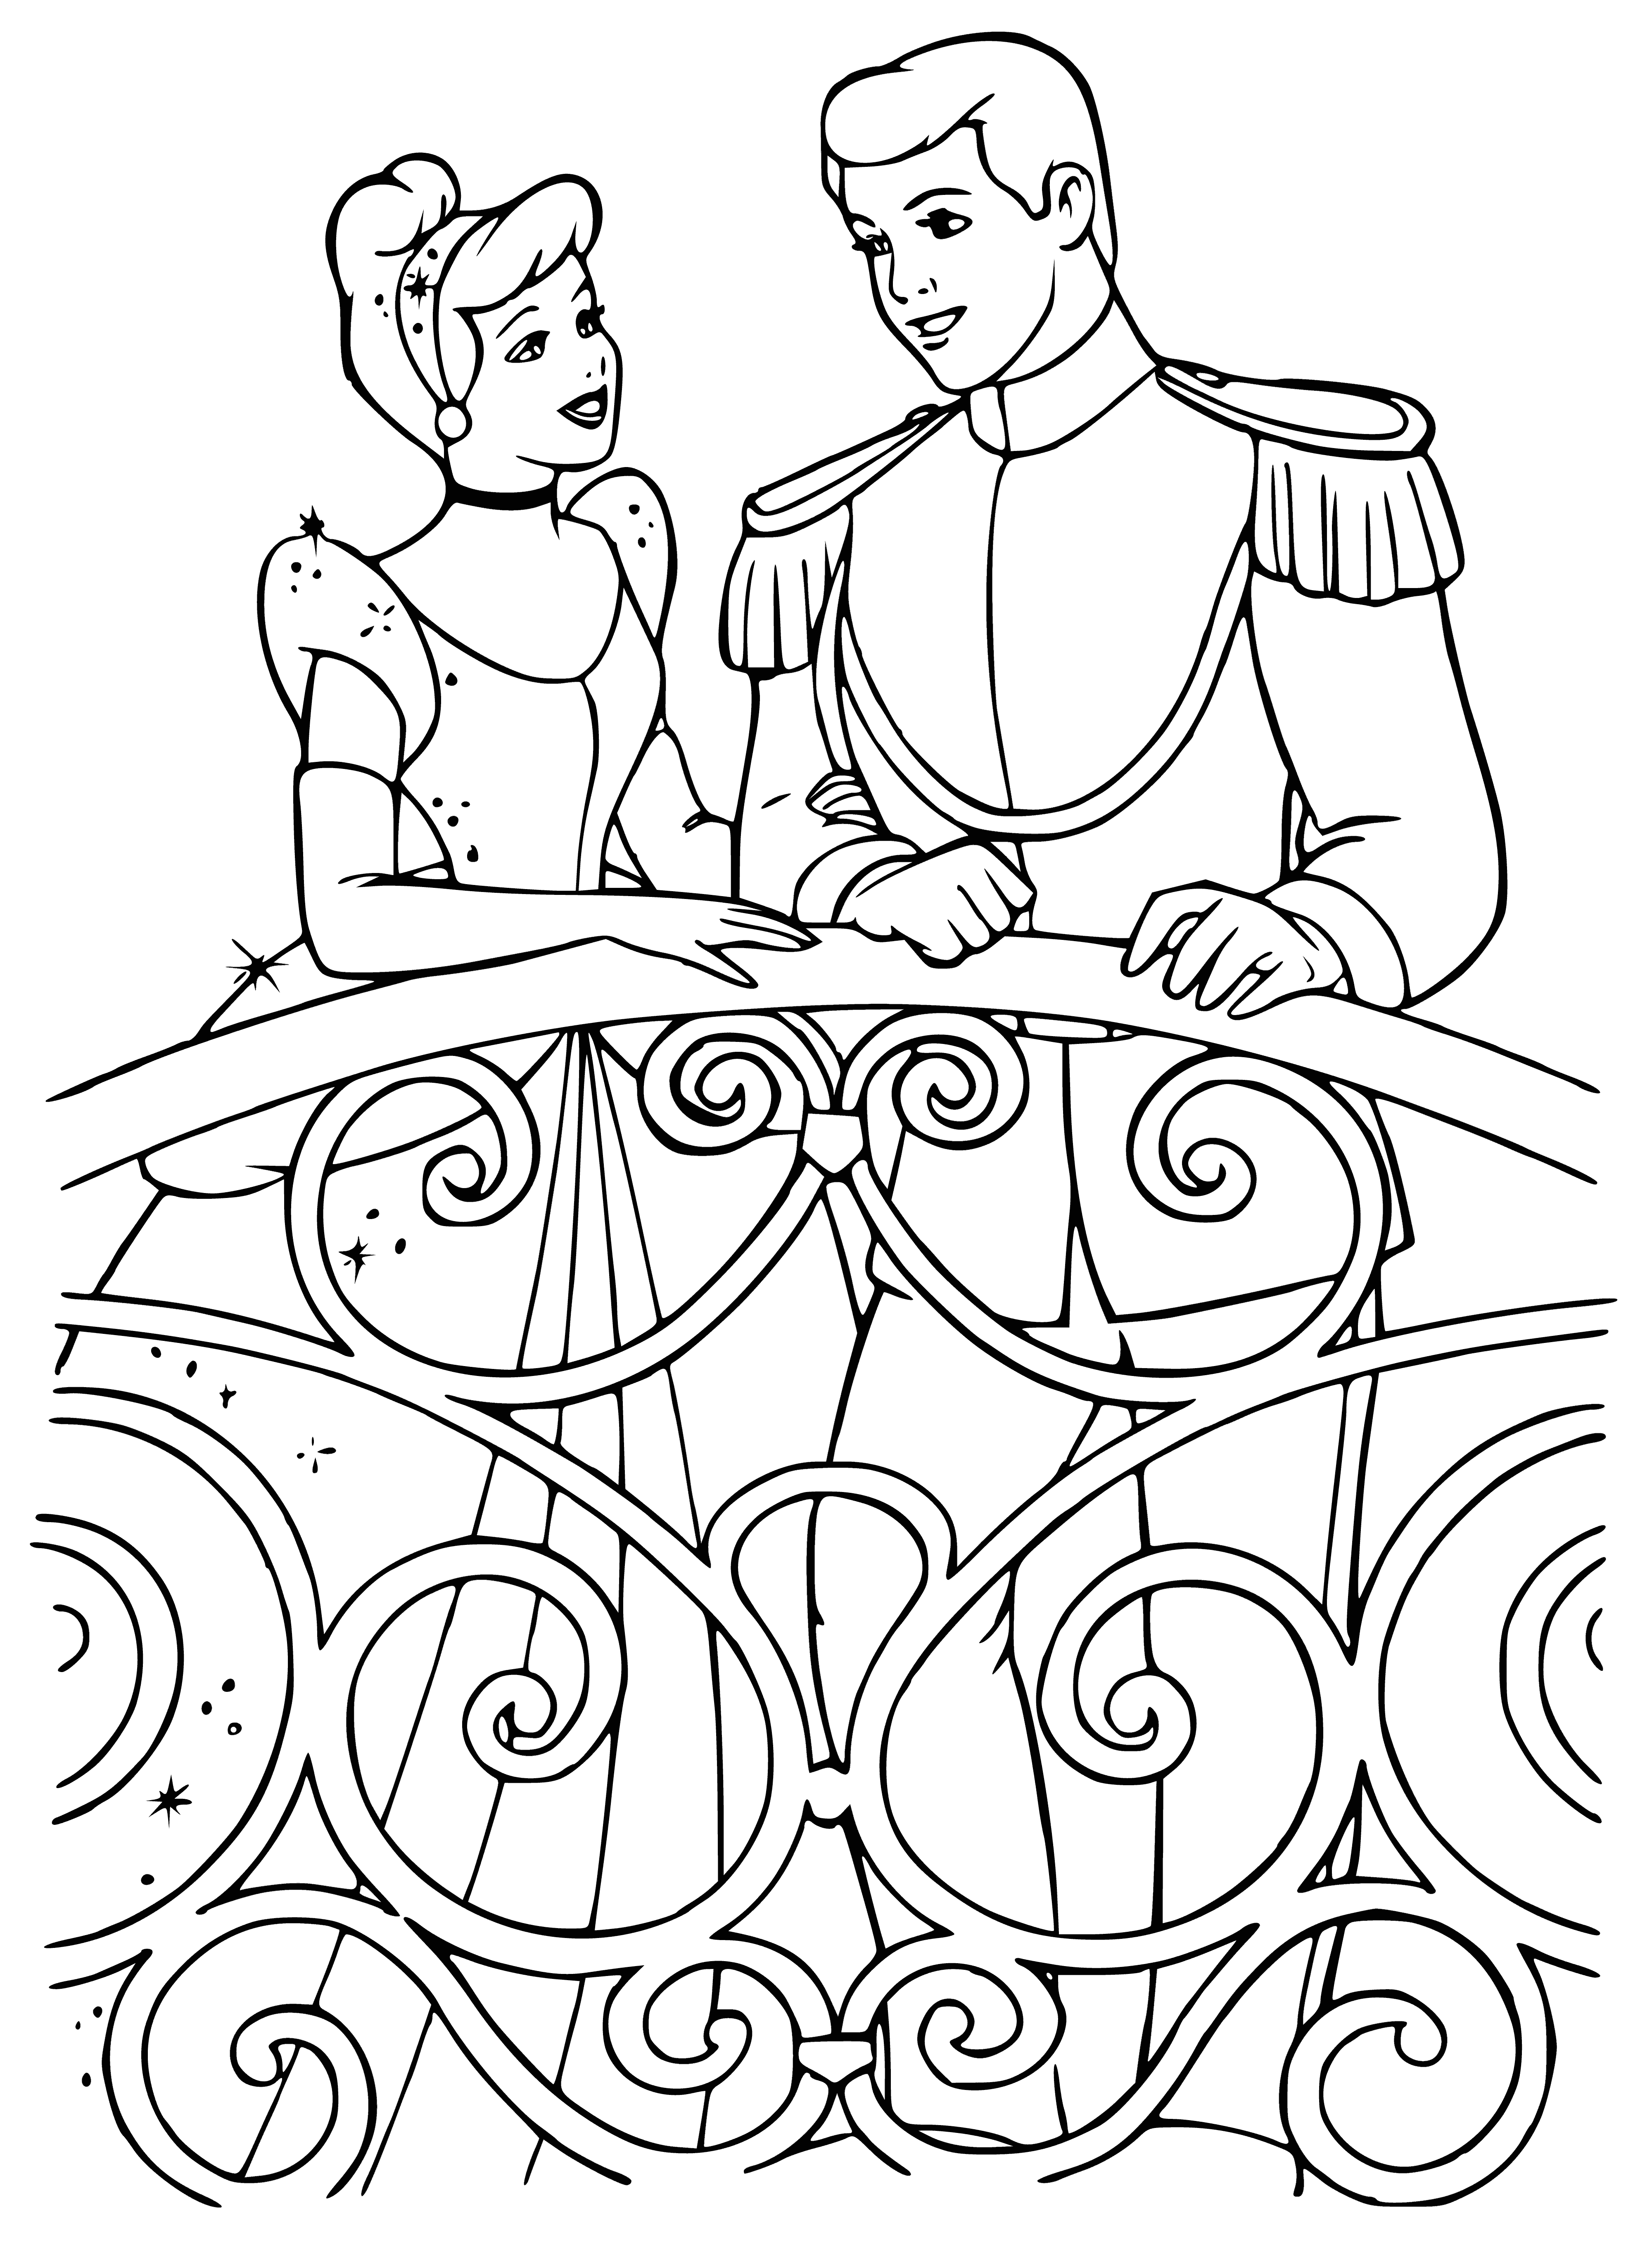 coloring page: Cinderella kneels next to the slipper, Prince stands by with hand on her shoulder. She looks up with a smile.